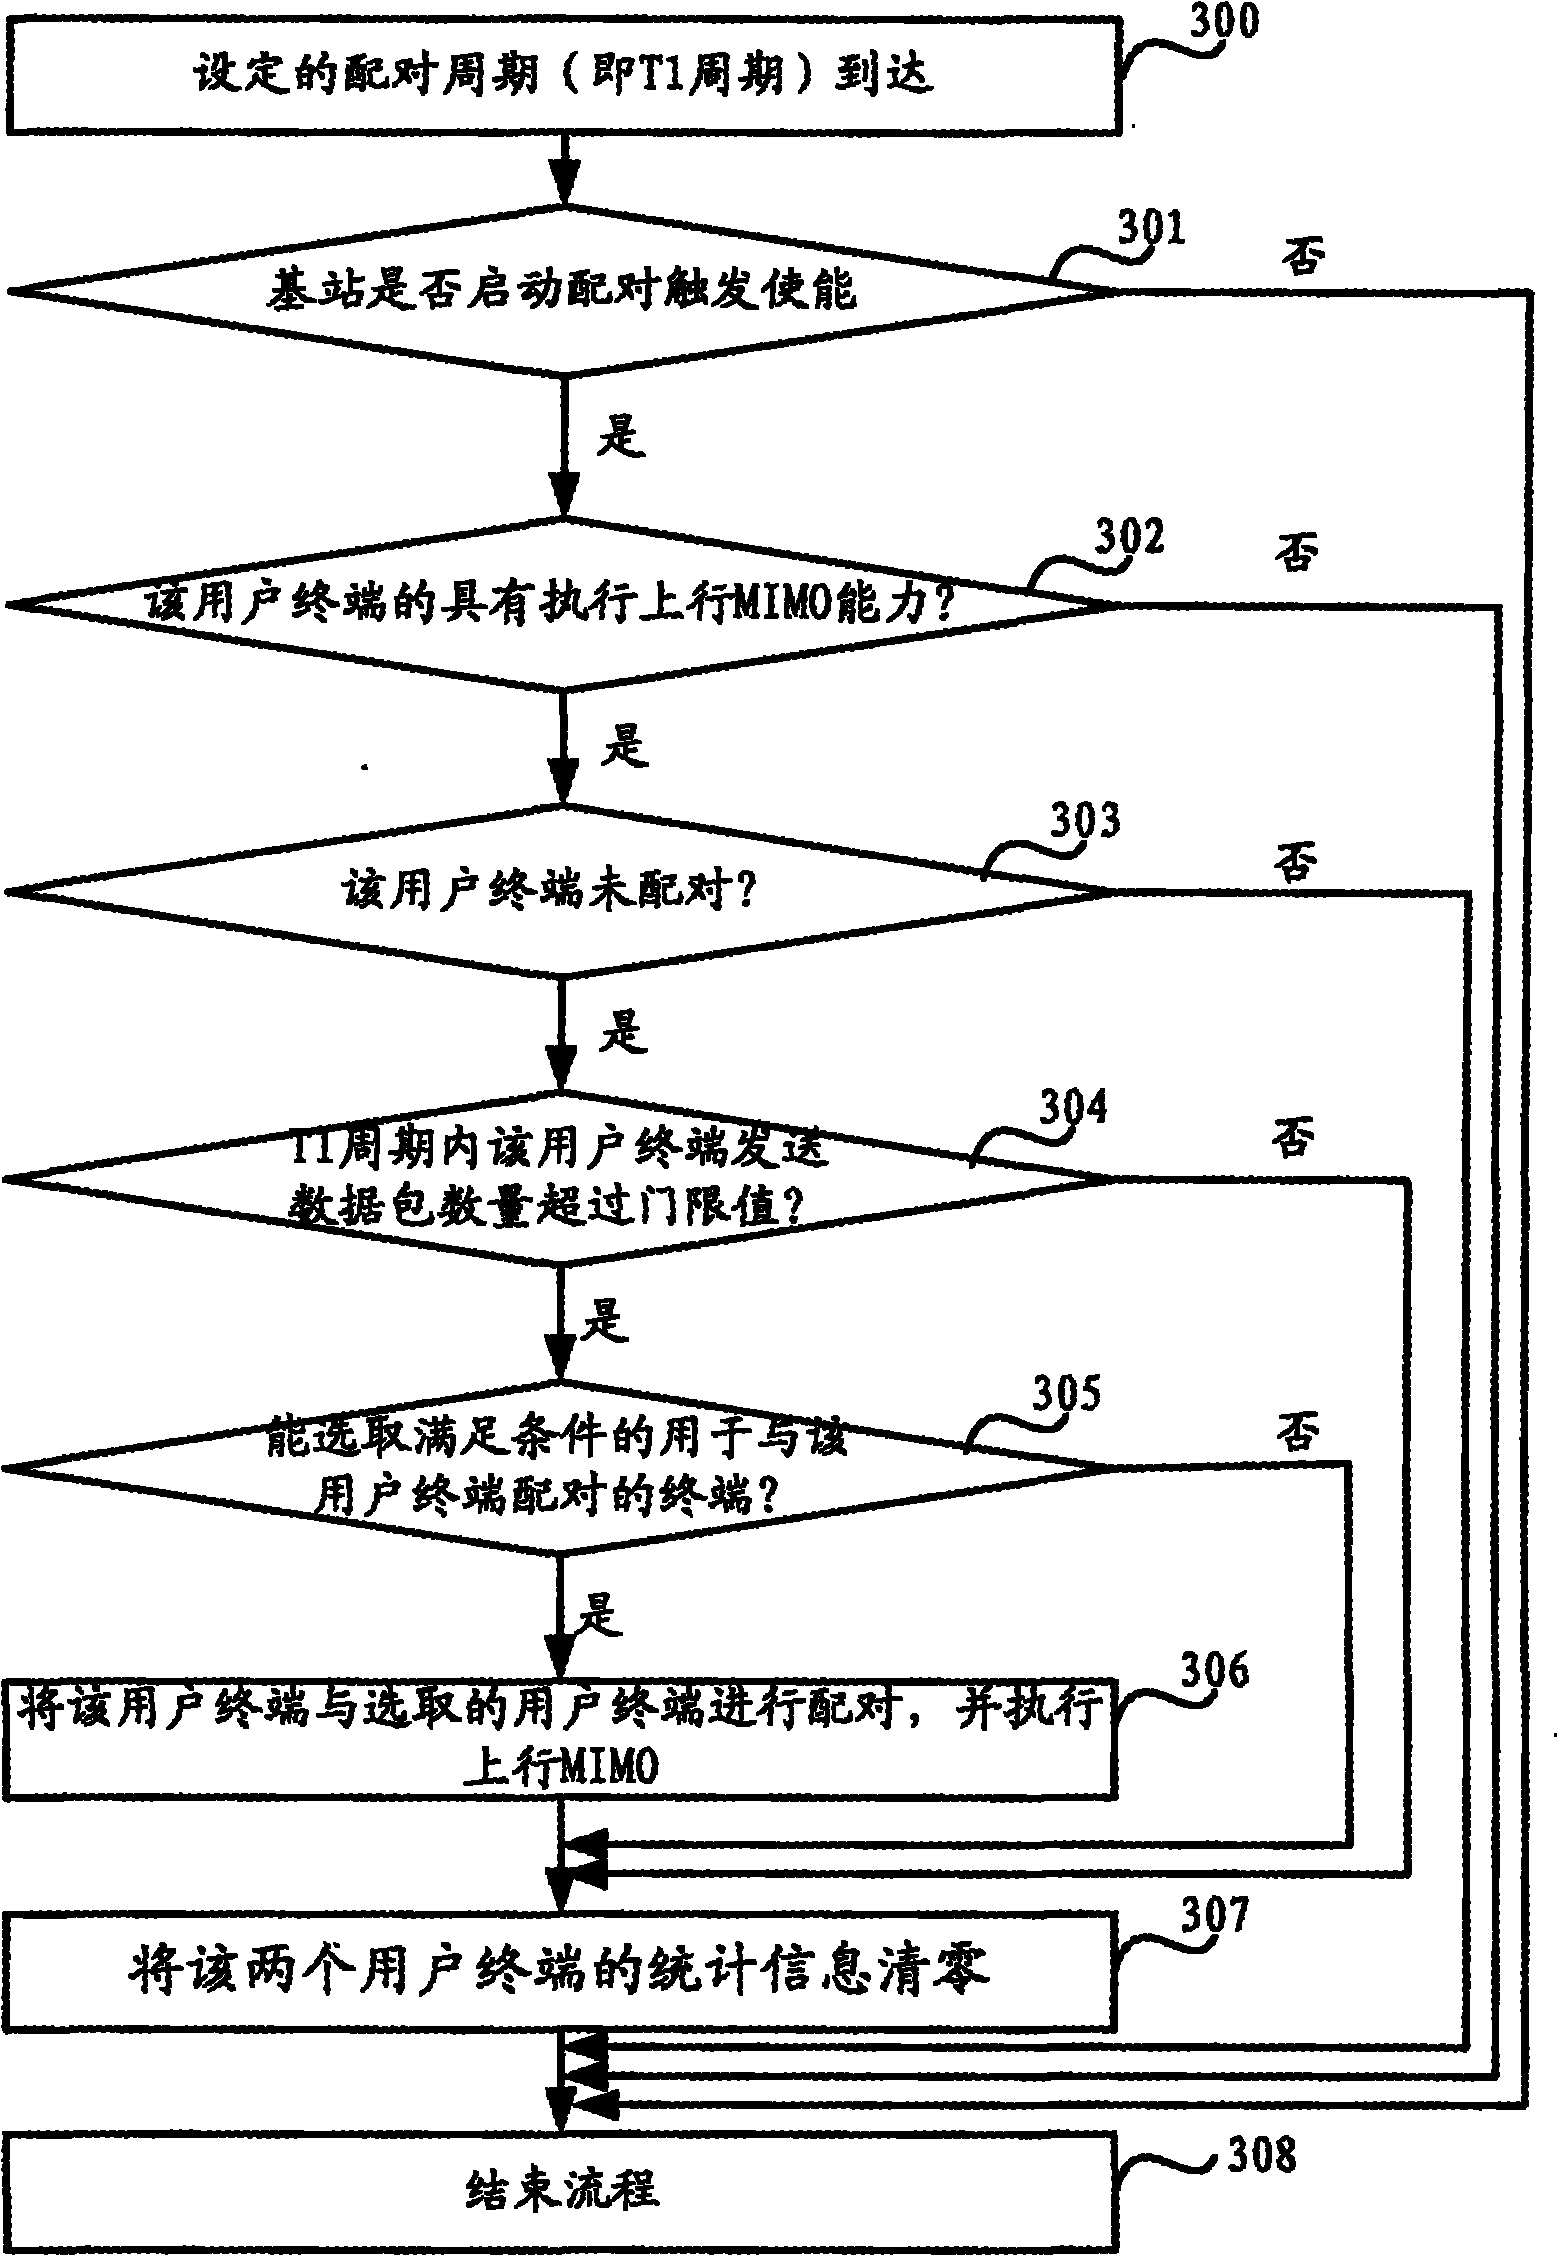 Method and device for self-adaptively pairing uplink multi-input/multi-output